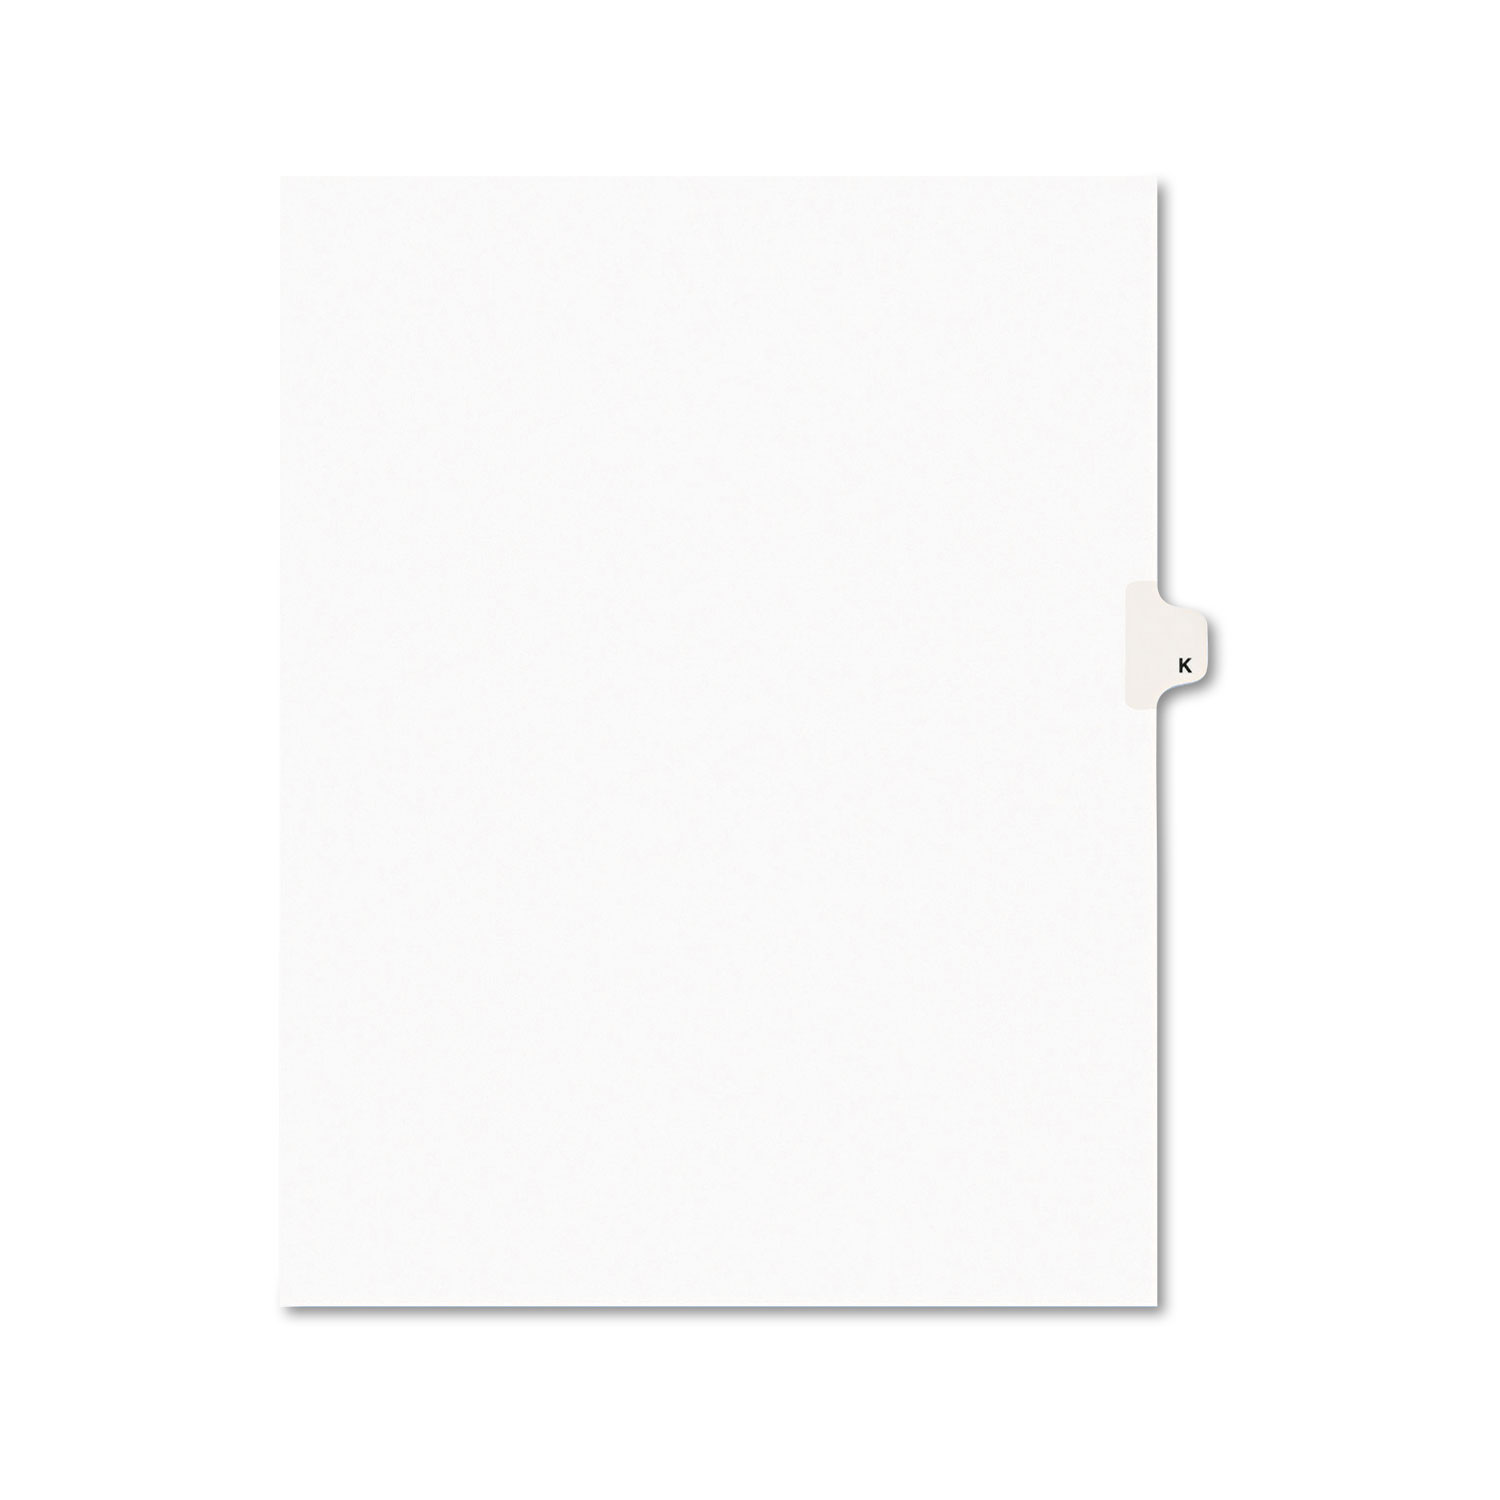  Avery 01411 Preprinted Legal Exhibit Side Tab Index Dividers, Avery Style, 26-Tab, K, 11 x 8.5, White, 25/Pack (AVE01411) 